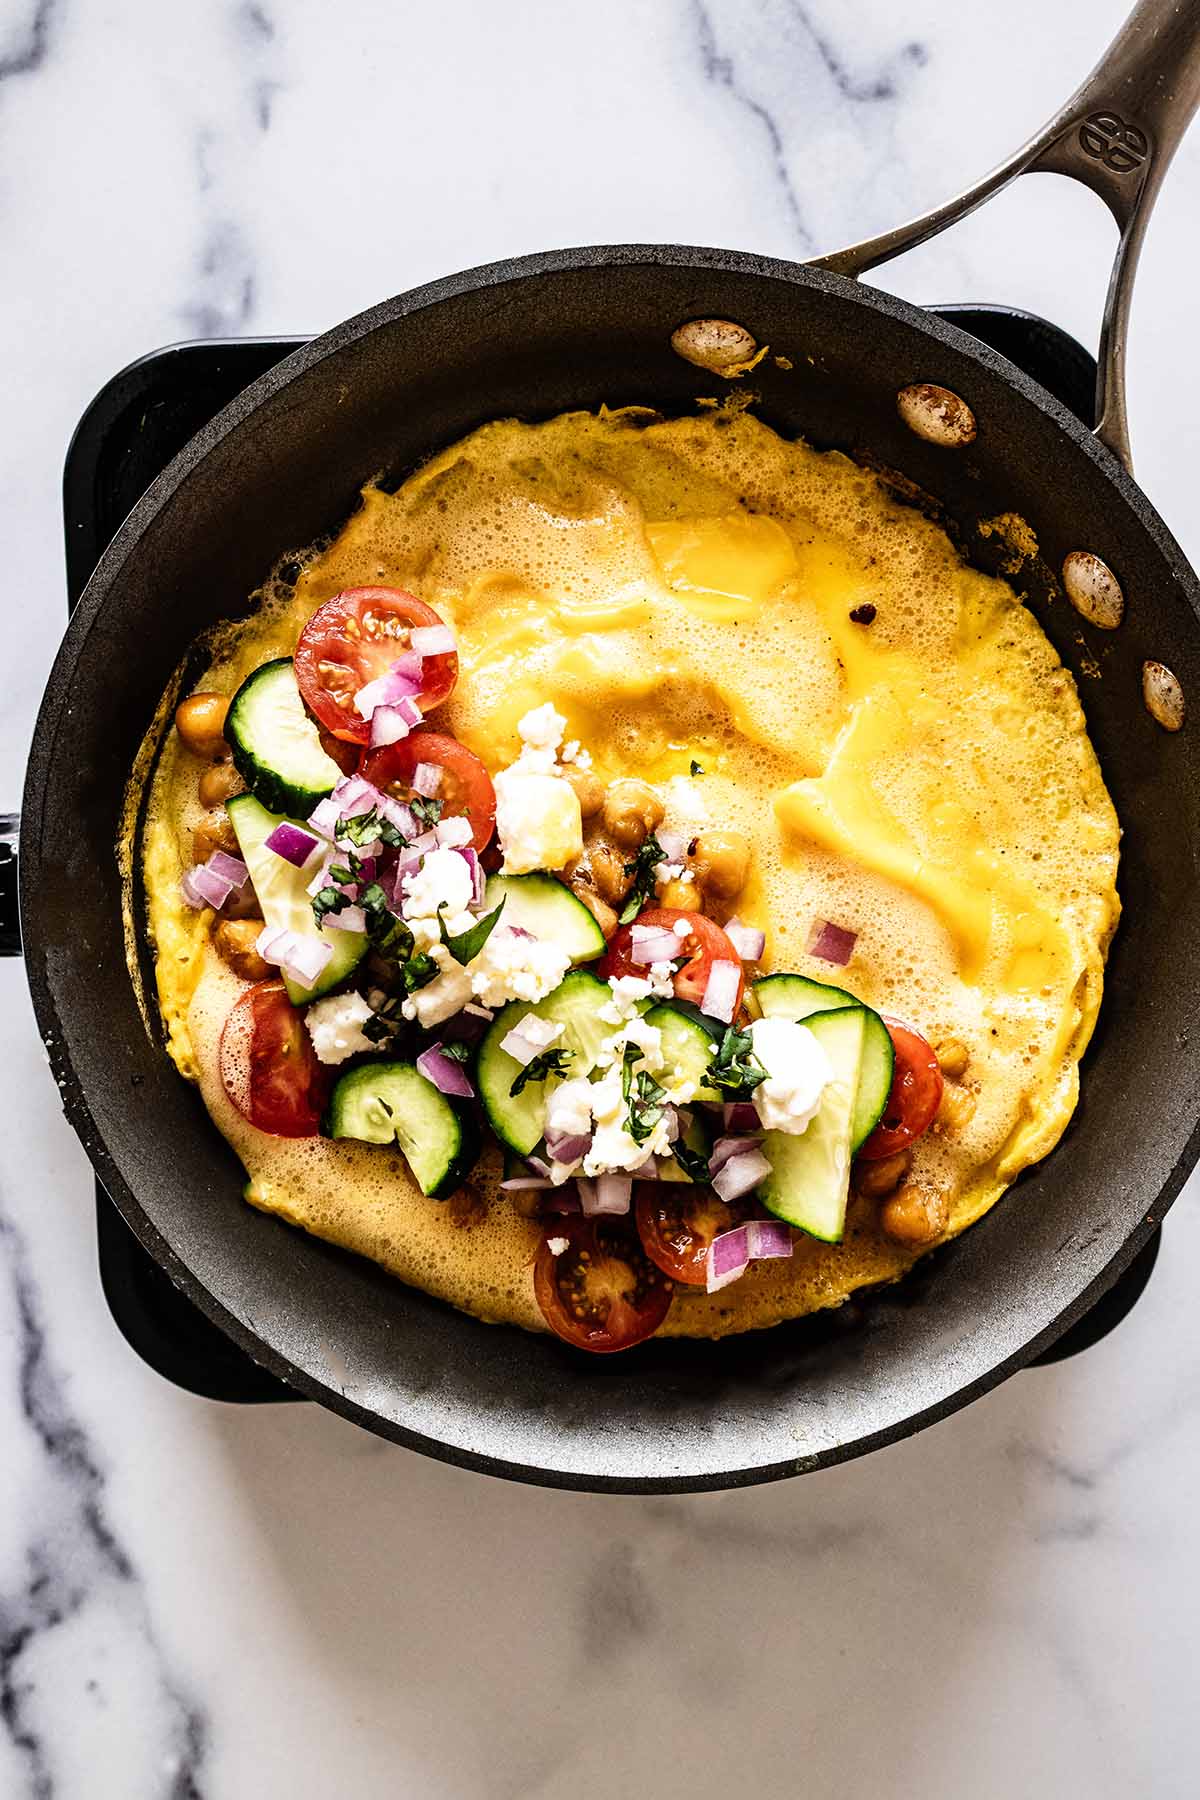 Overhead view of Greek omelette fillings on top of half of omelette in a skillet